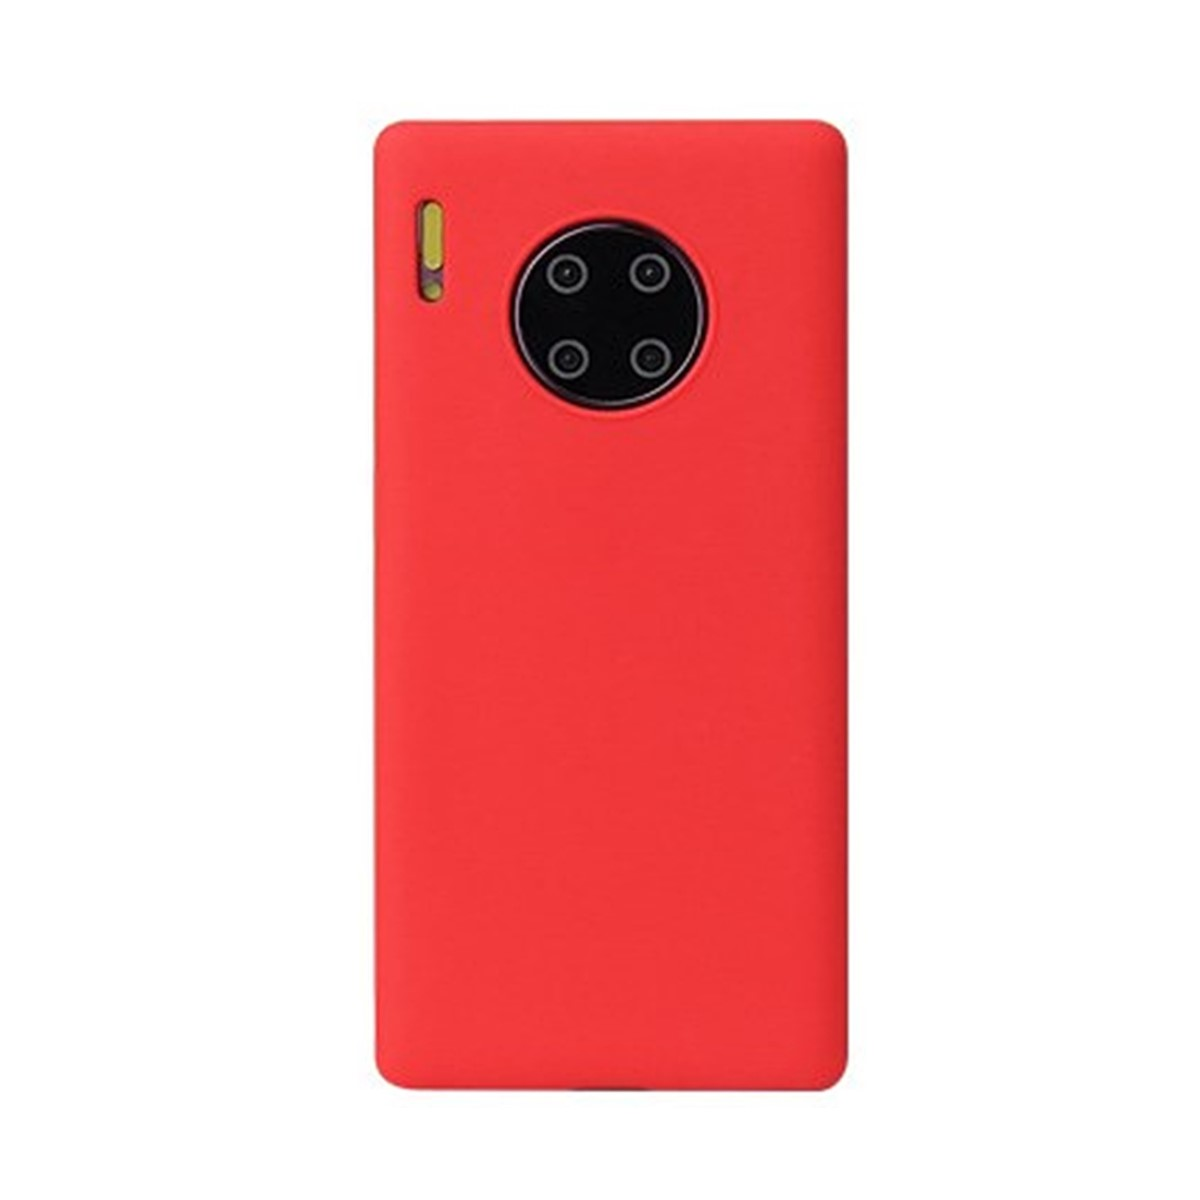 Rot Mate Huawei, Silikon, Handycase Backcover, aus 30 Pro, COVERKINGZ